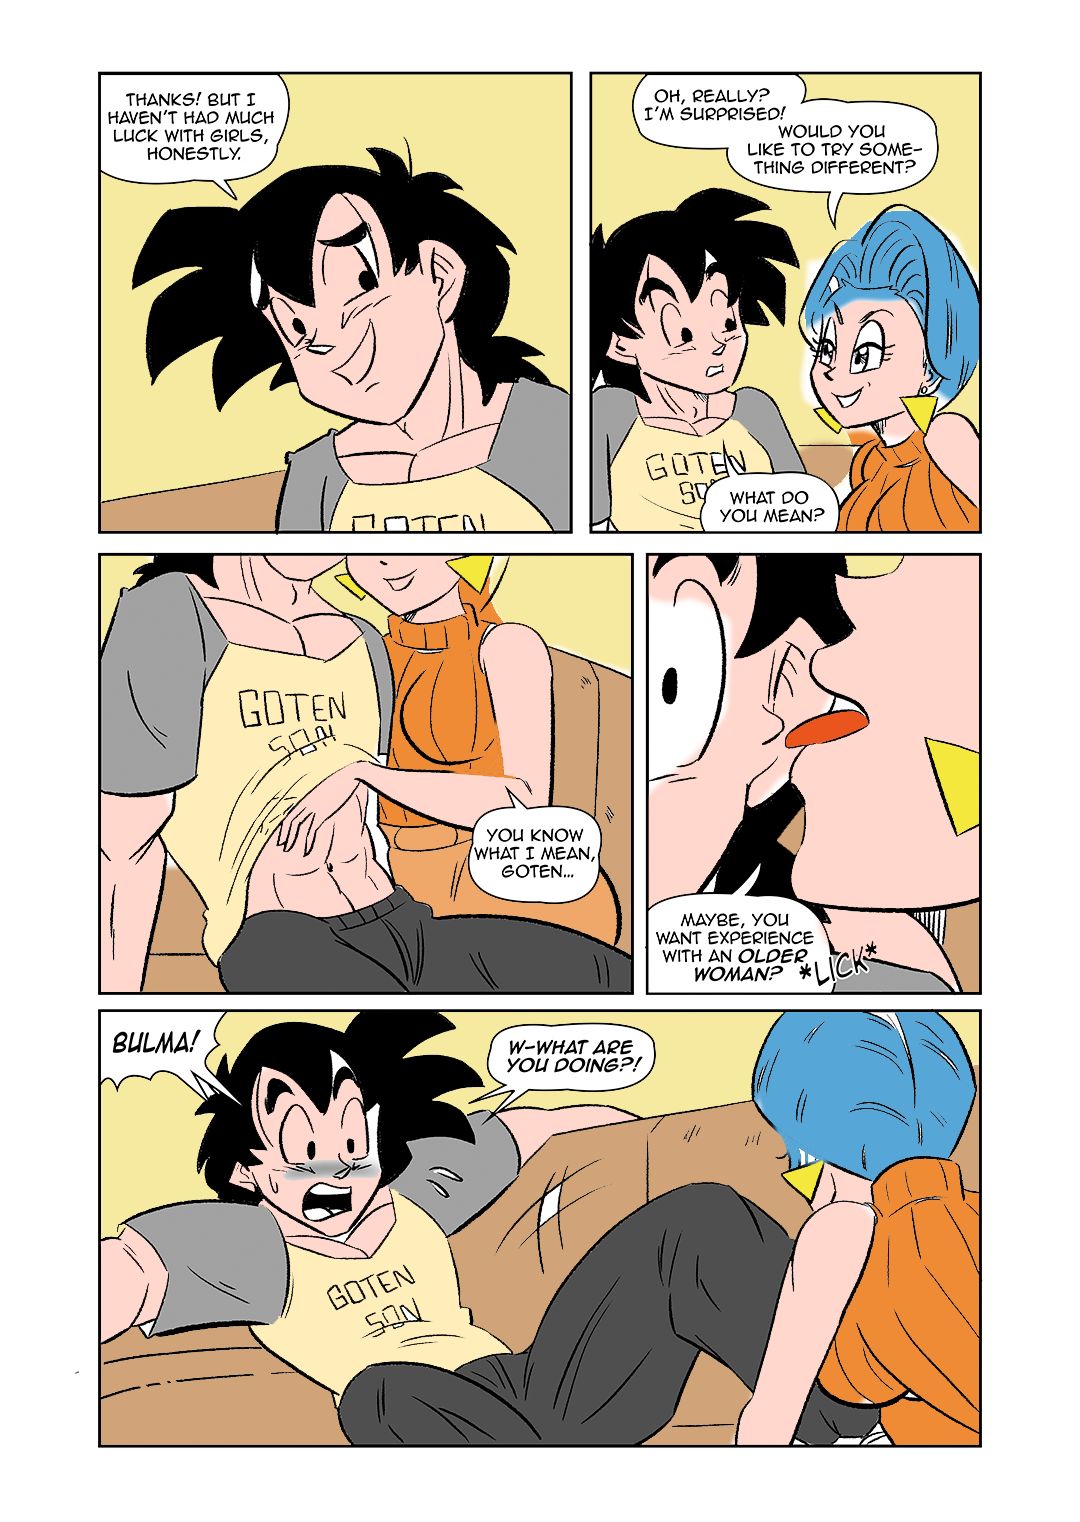 The Switch Up (Dragon Ball Z) by Funsexydb page 8